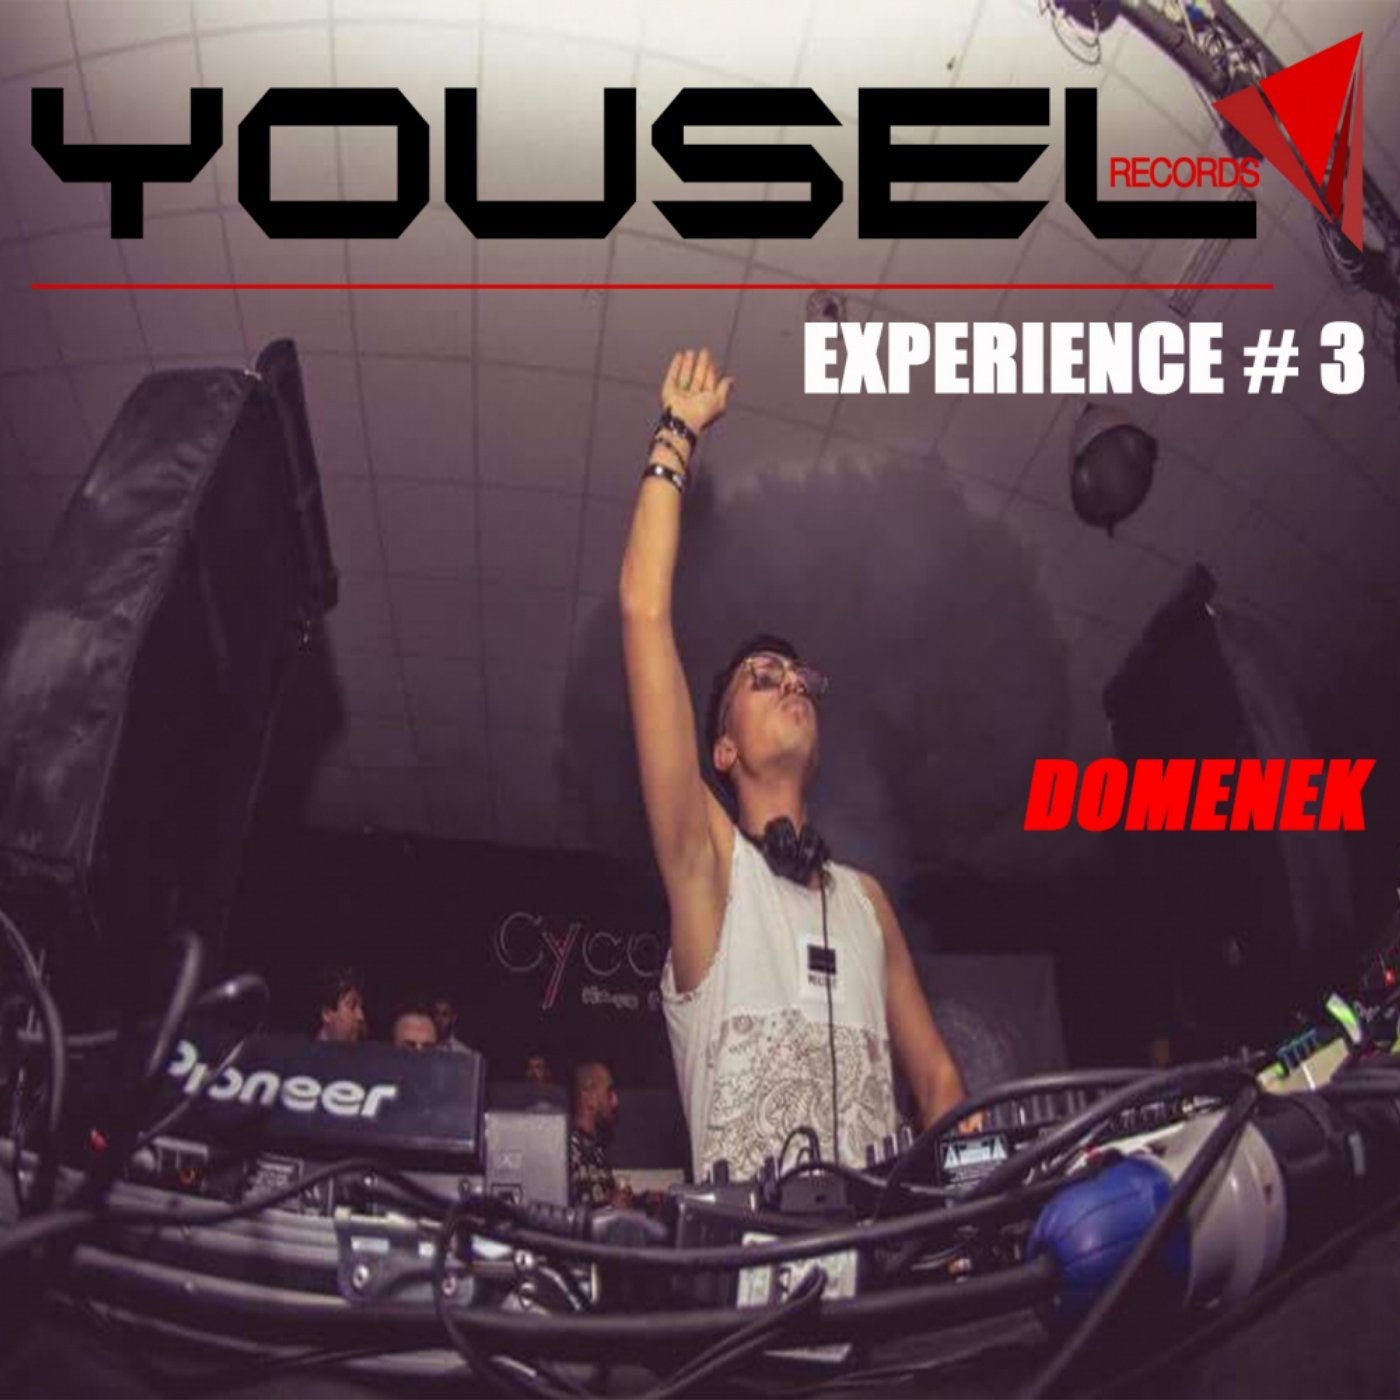 Yousel Experience # 3